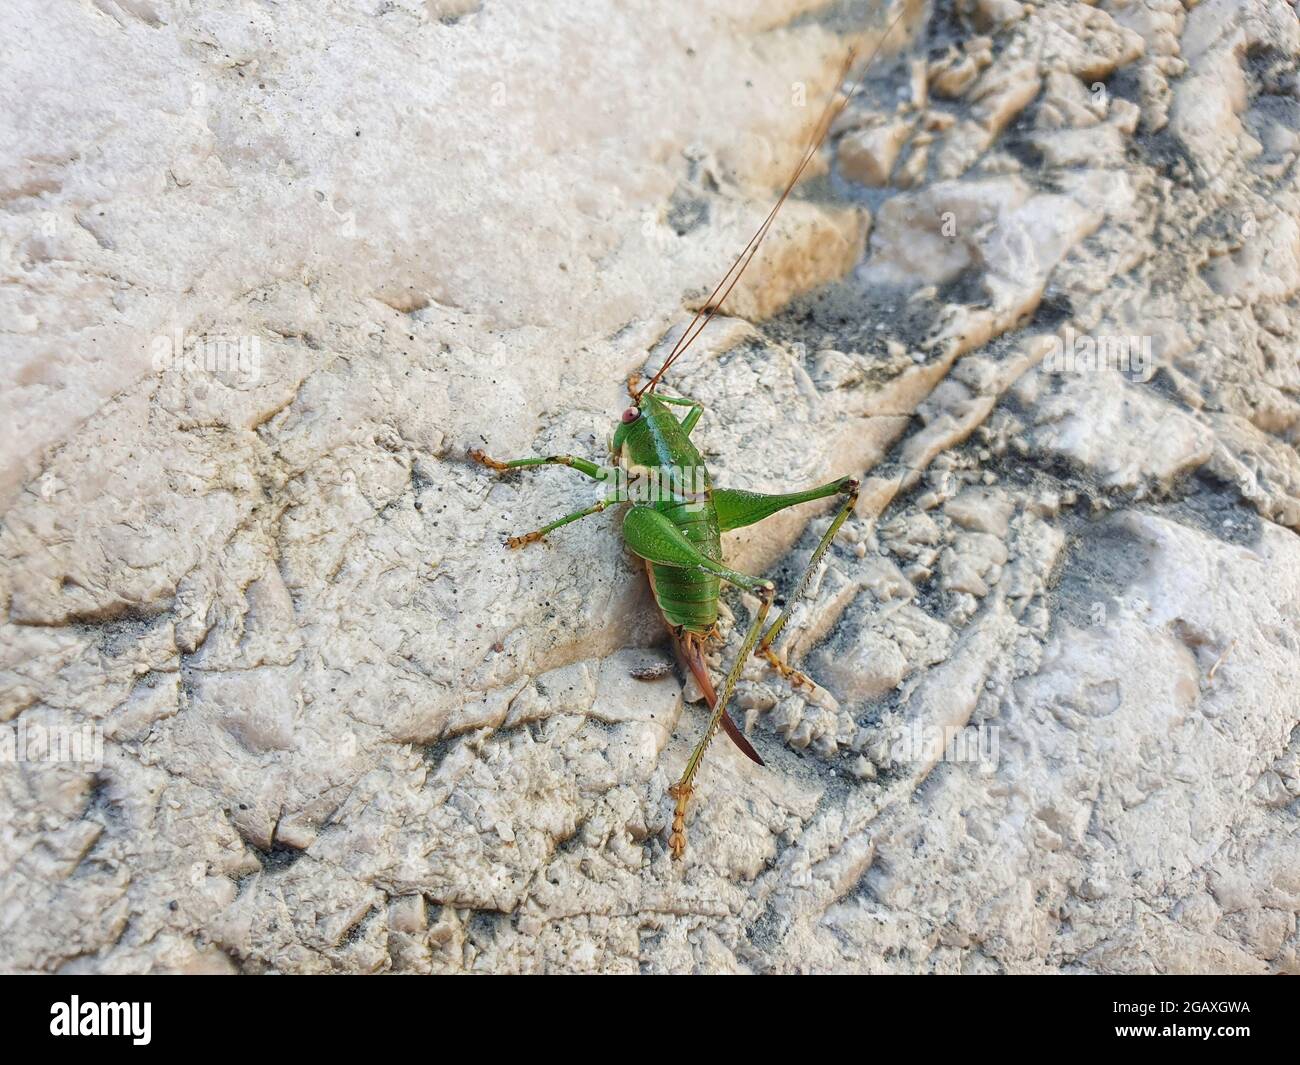 Green grasshopper on a gray stone. The insect sits motionless and basks in the sun. Stock Photo